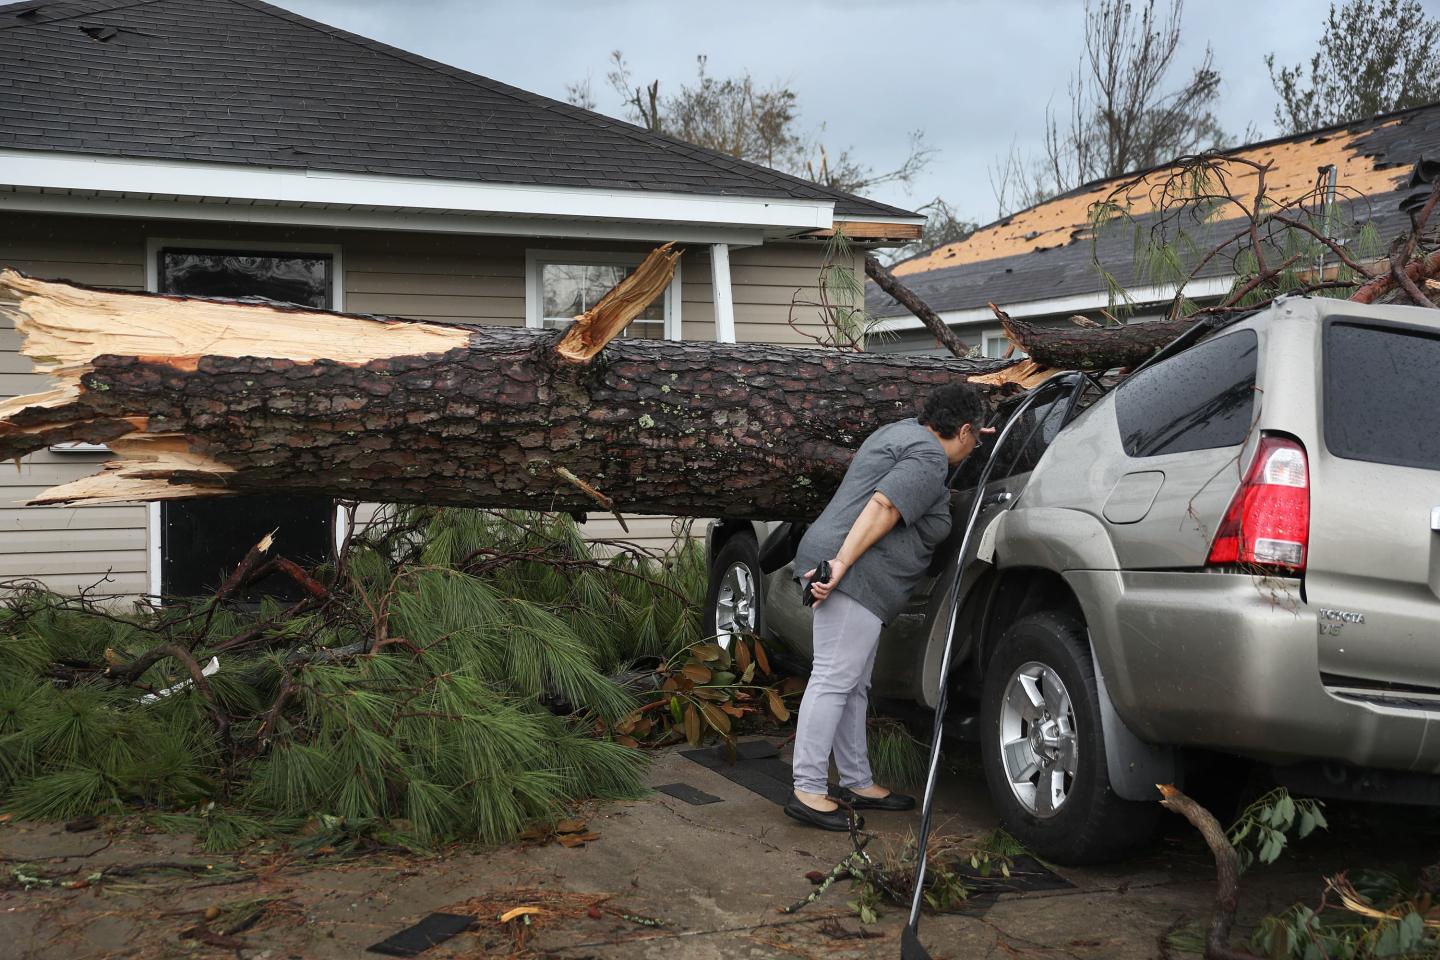 A person checks inside of a car that has been crushed by a tree after a hurricane